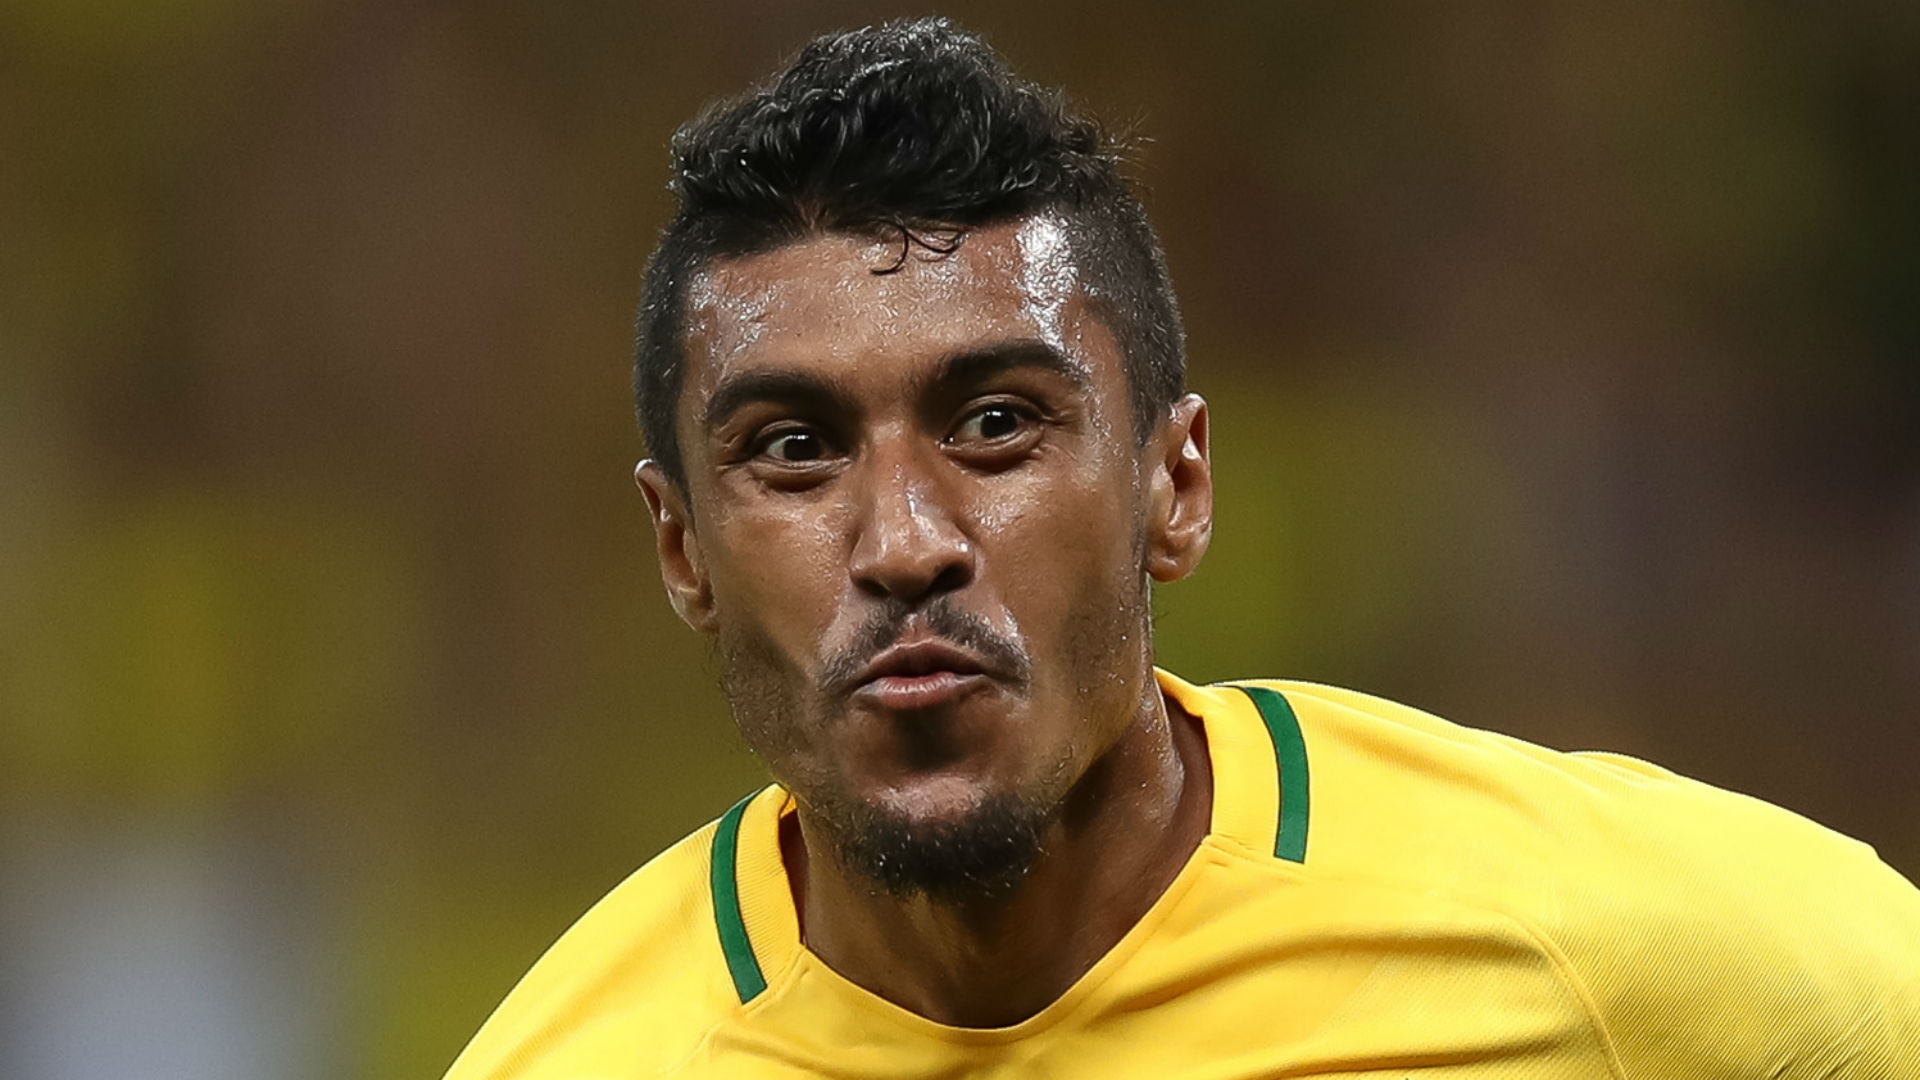 AFC Champions League Review: Paulinho at the double in Guangzhou Evergrande rout